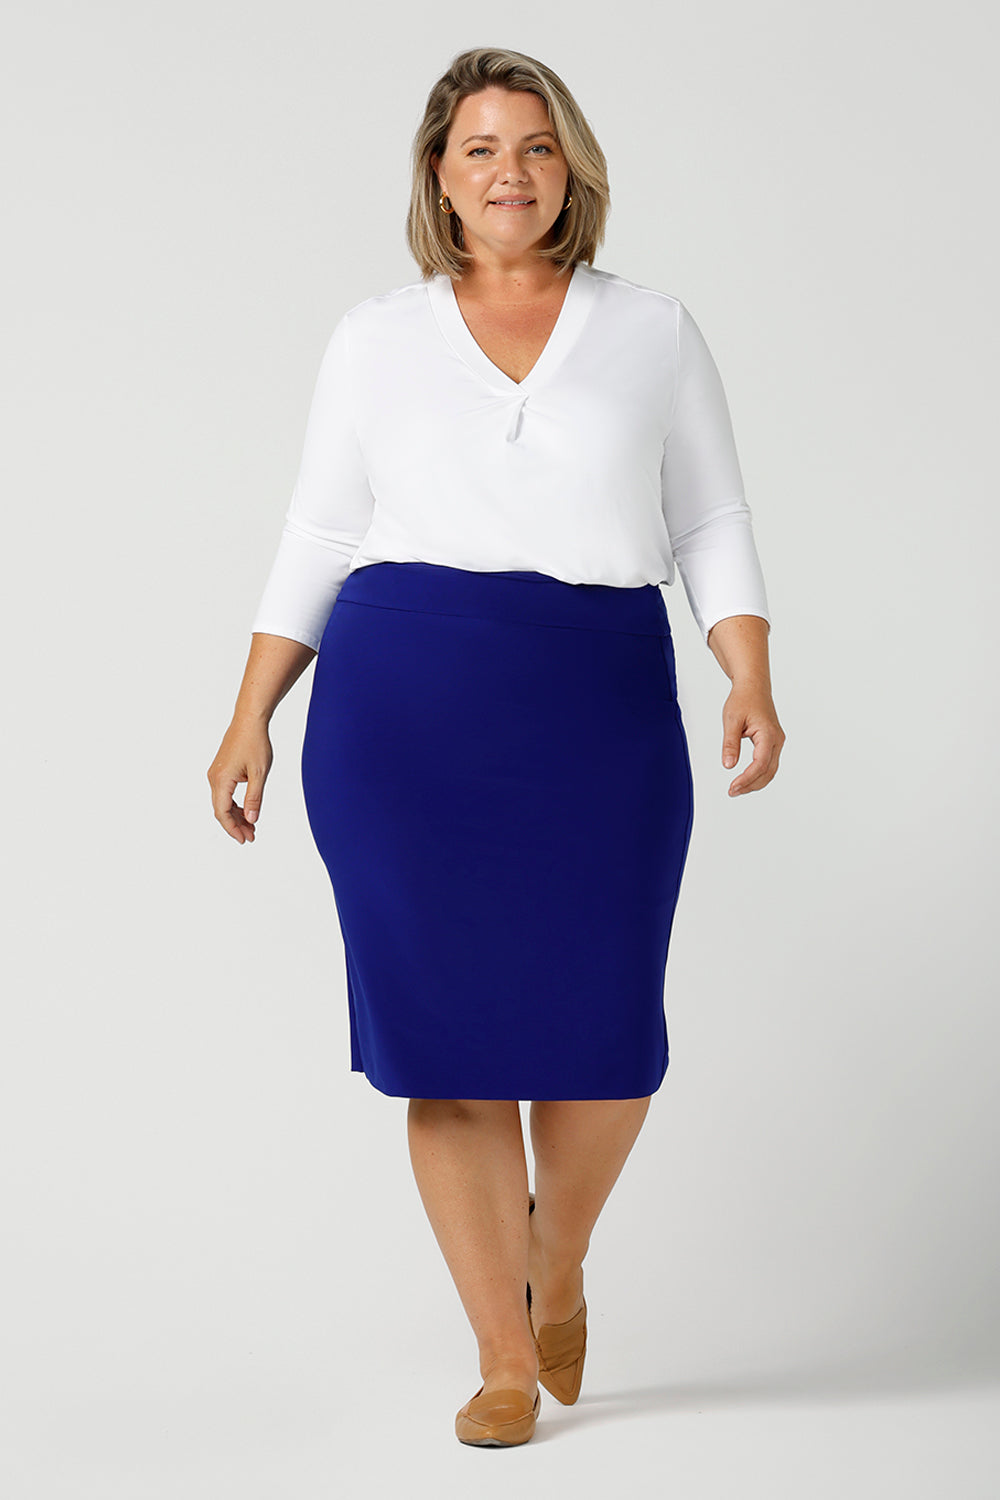 A good white top for your capsule wardrobe, this V-neck , 3/4 sleeve top is made in luxurious white bamboo jersey. Worn with a cobalt blue tube skirt and shown on a size 18, plus size woman, this classic top makes a great work blouse. Made in Australia by Australian andNew Zealand women's clothing brand, Leina & Fleur, this white jersey top is available to shop online in sizes 8 to 24.